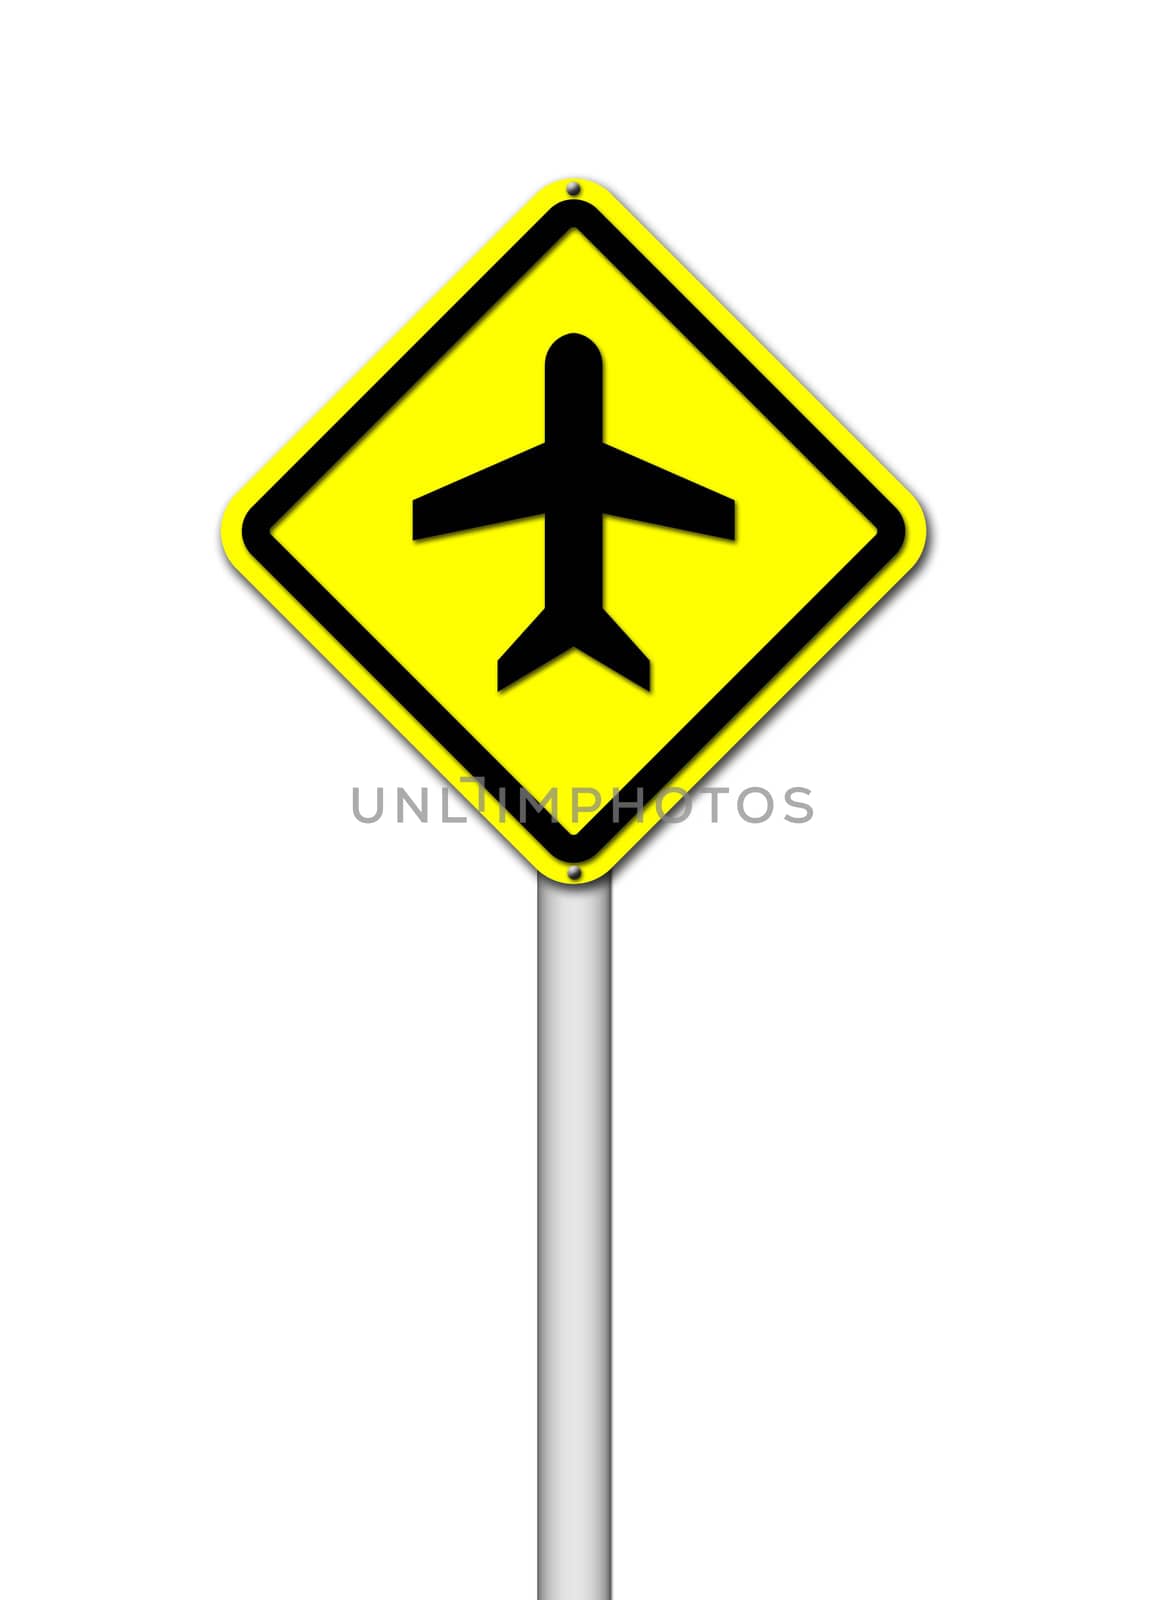 Airport sign on white background